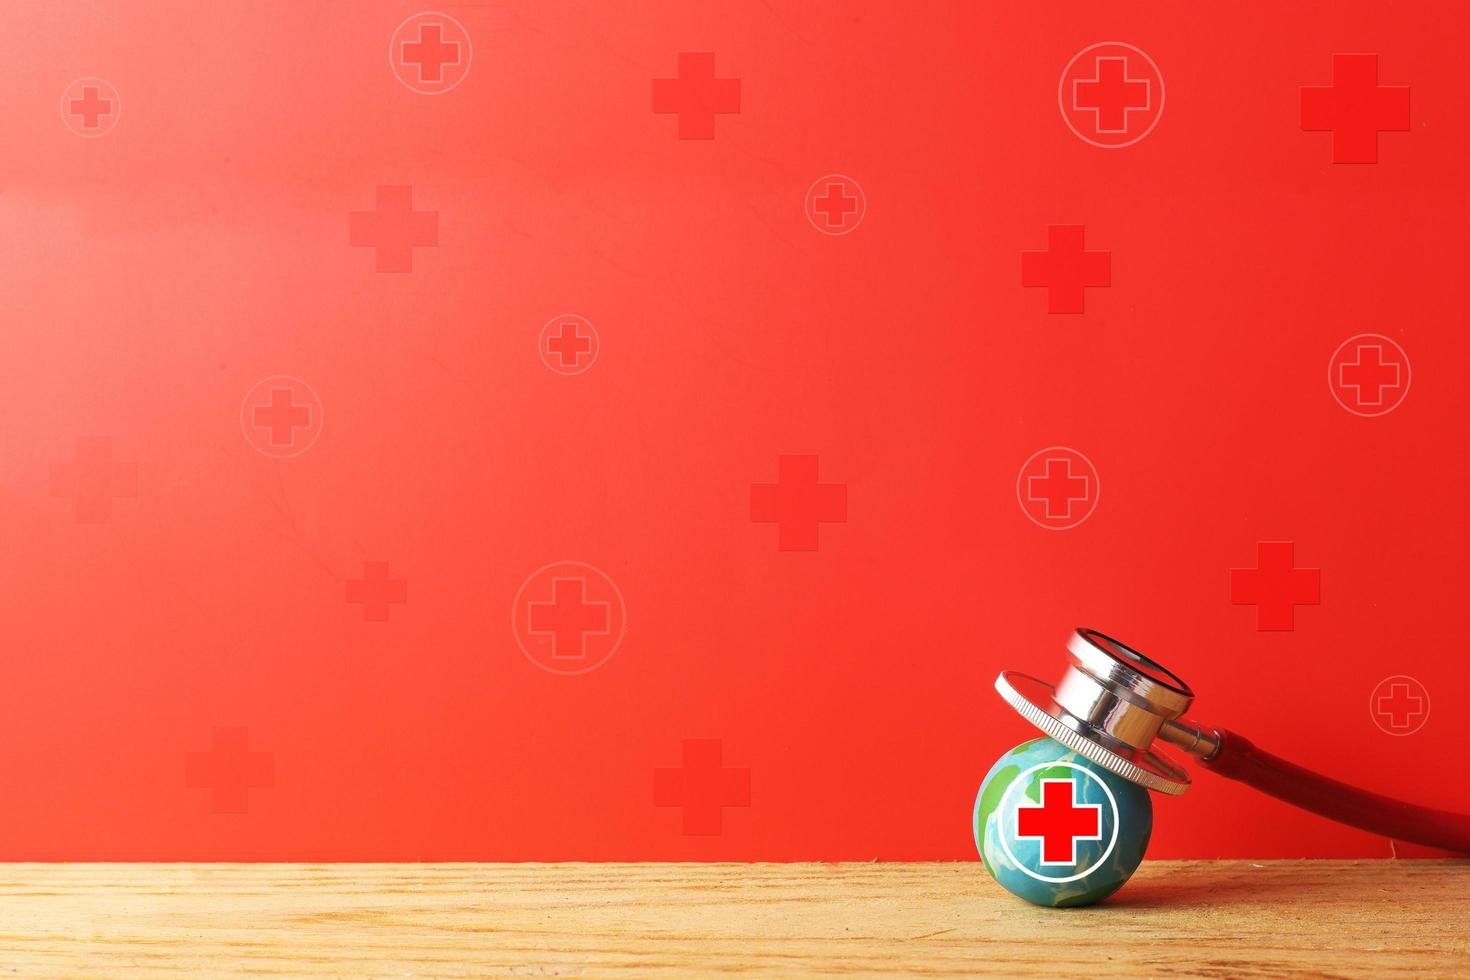 World Red Cross and Red Crescent Day - Blood Donor - international Healthcare concept - Earth with red cross and stethoscope against red background photo